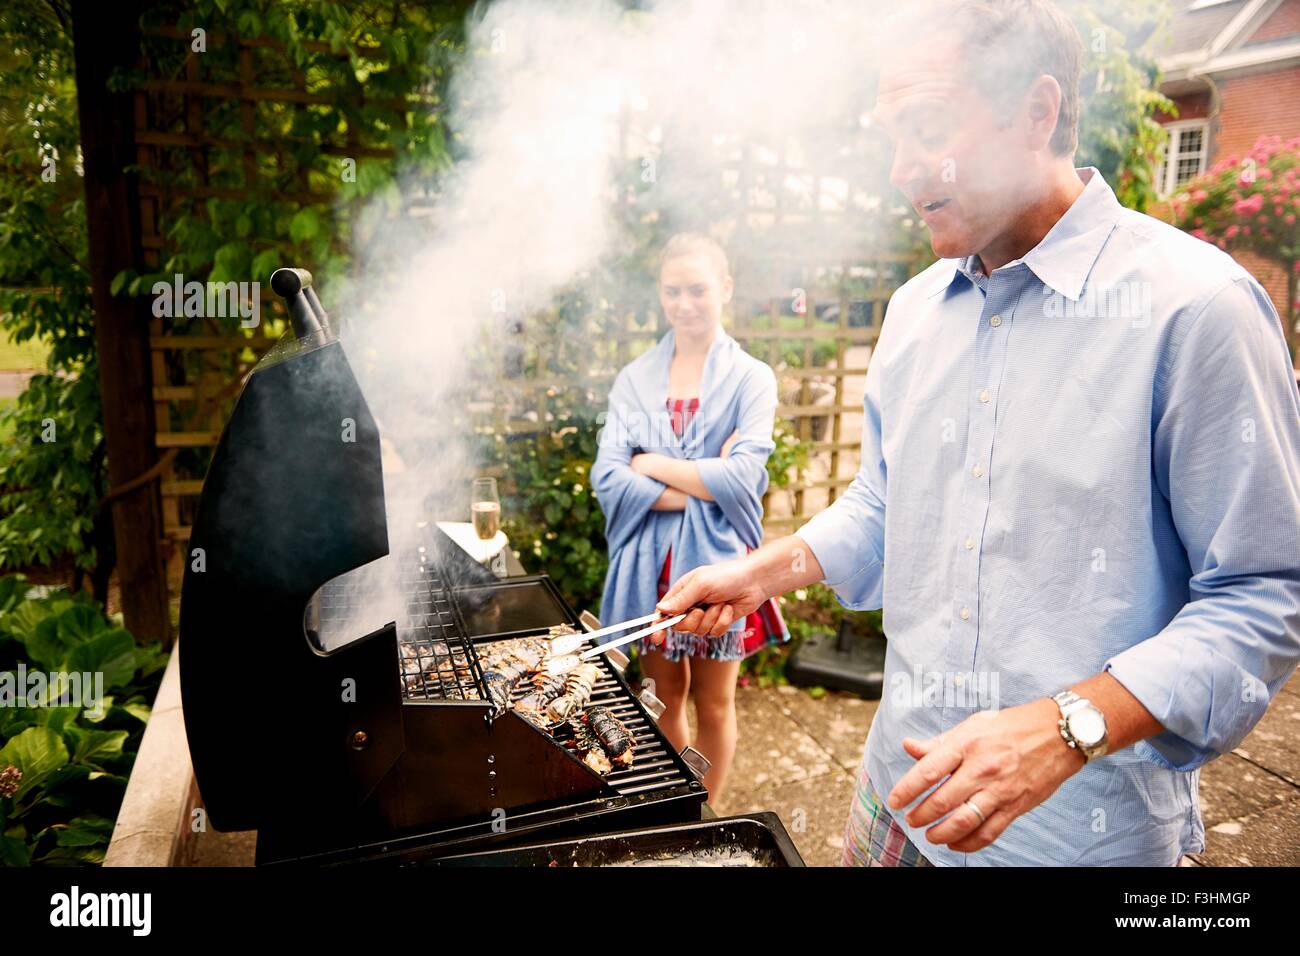 Daughter watching father cook sea food on barbecue Stock Photo